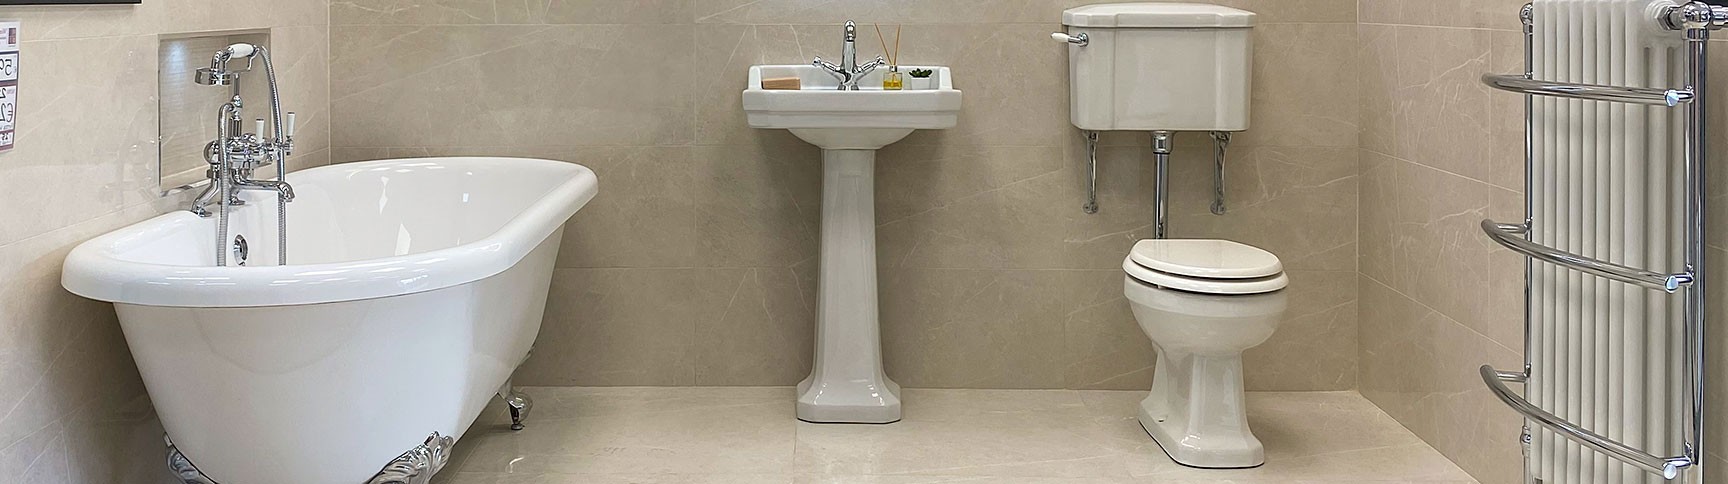 Traditional Toilets & Old Fashioned Toilets | World of Tiles